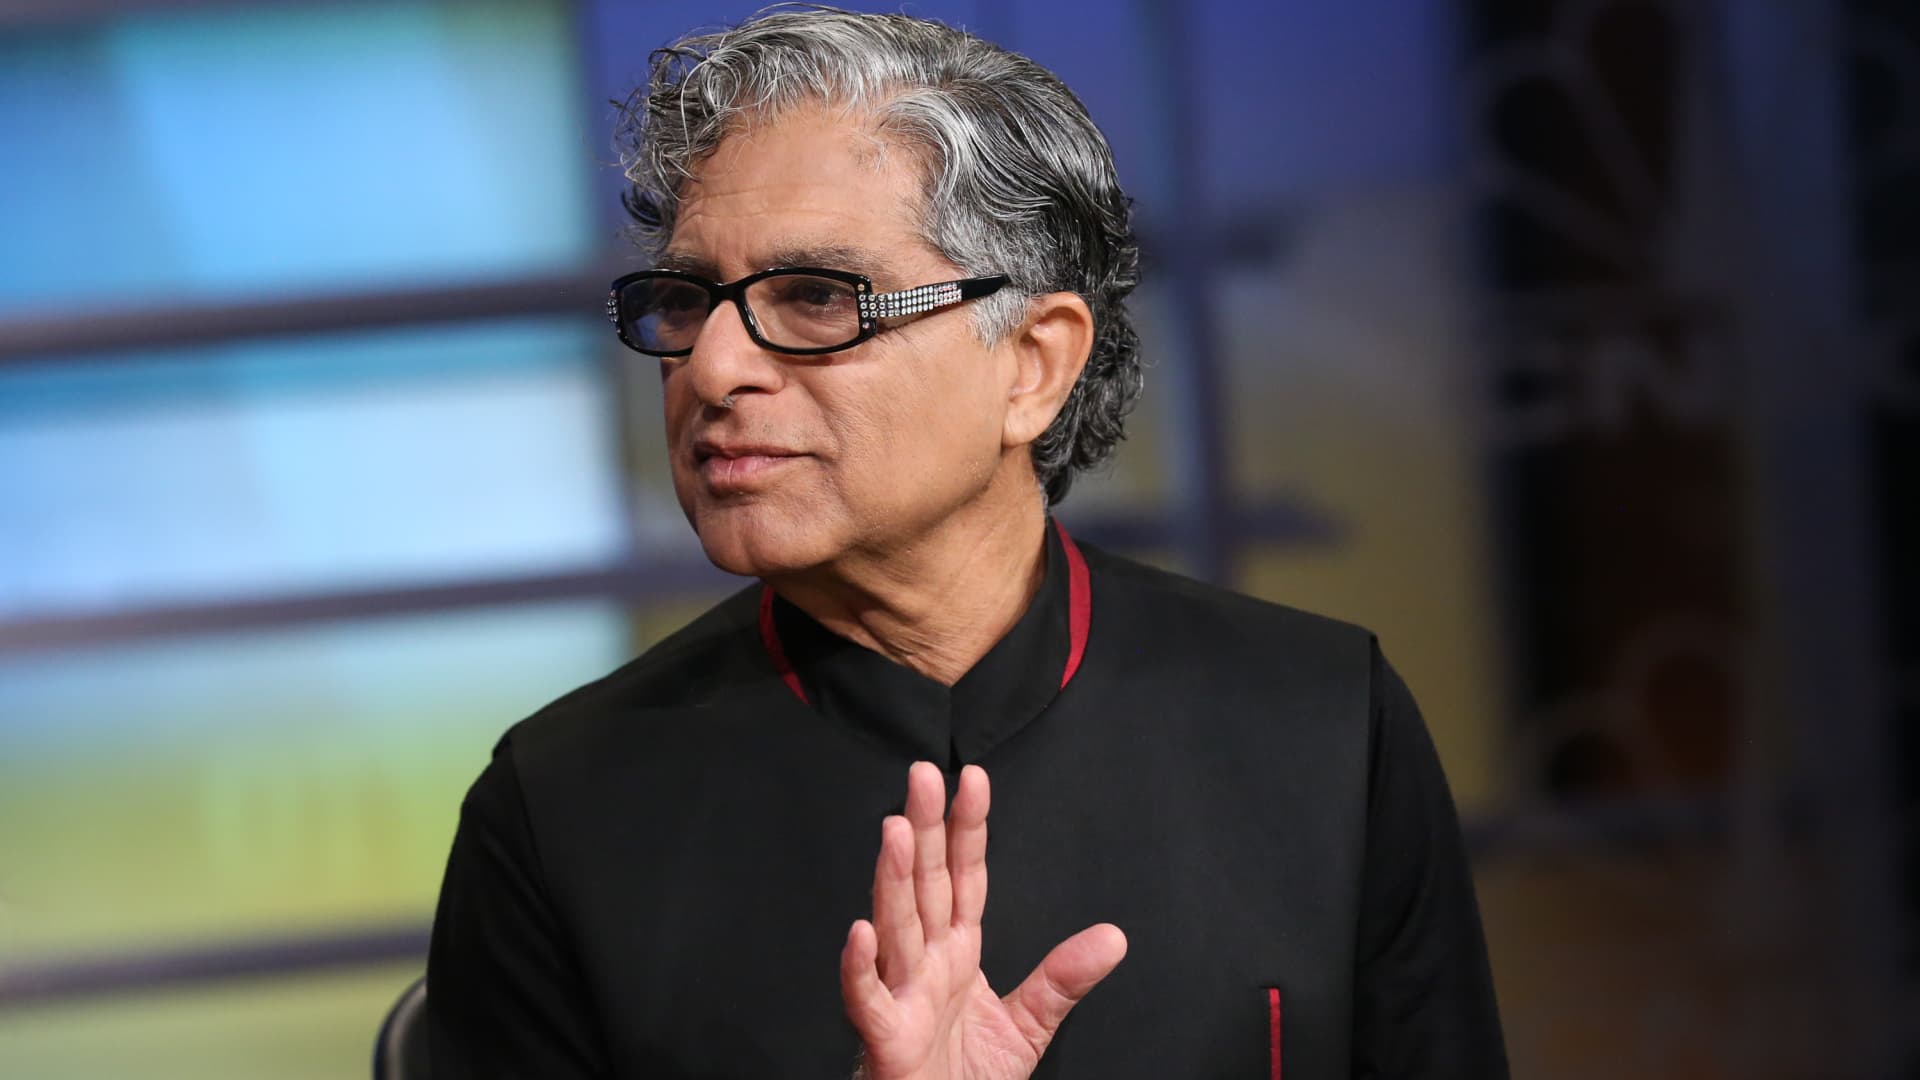 Deepak Chopra: Crypto is in crisis, but investors need to focus on the long-term